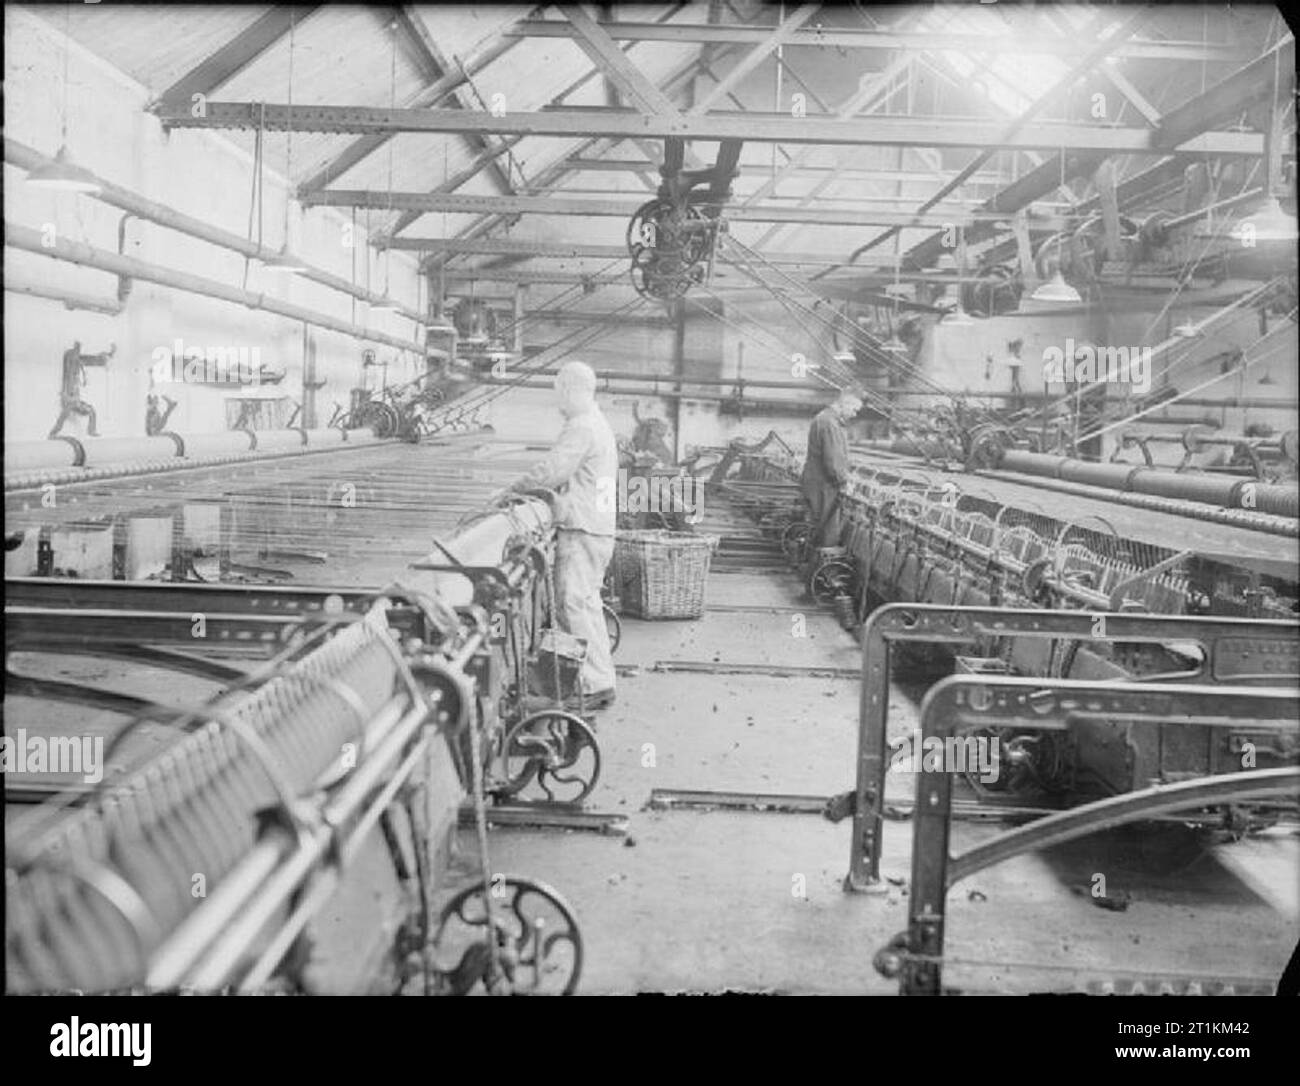 Huddersfield Cloth Mill- the work of C and J Hirst and Sons Ltd., Sunnybank, Longwood, Huddersfield, Yorkshire, England, UK, 1943 Mill workers man large yarn spinning machines at the mill of C and J Hirst and Sons Ltd. in Huddersfield. These machines spin wool into yarn, which will then be woven into cloth. Stock Photo